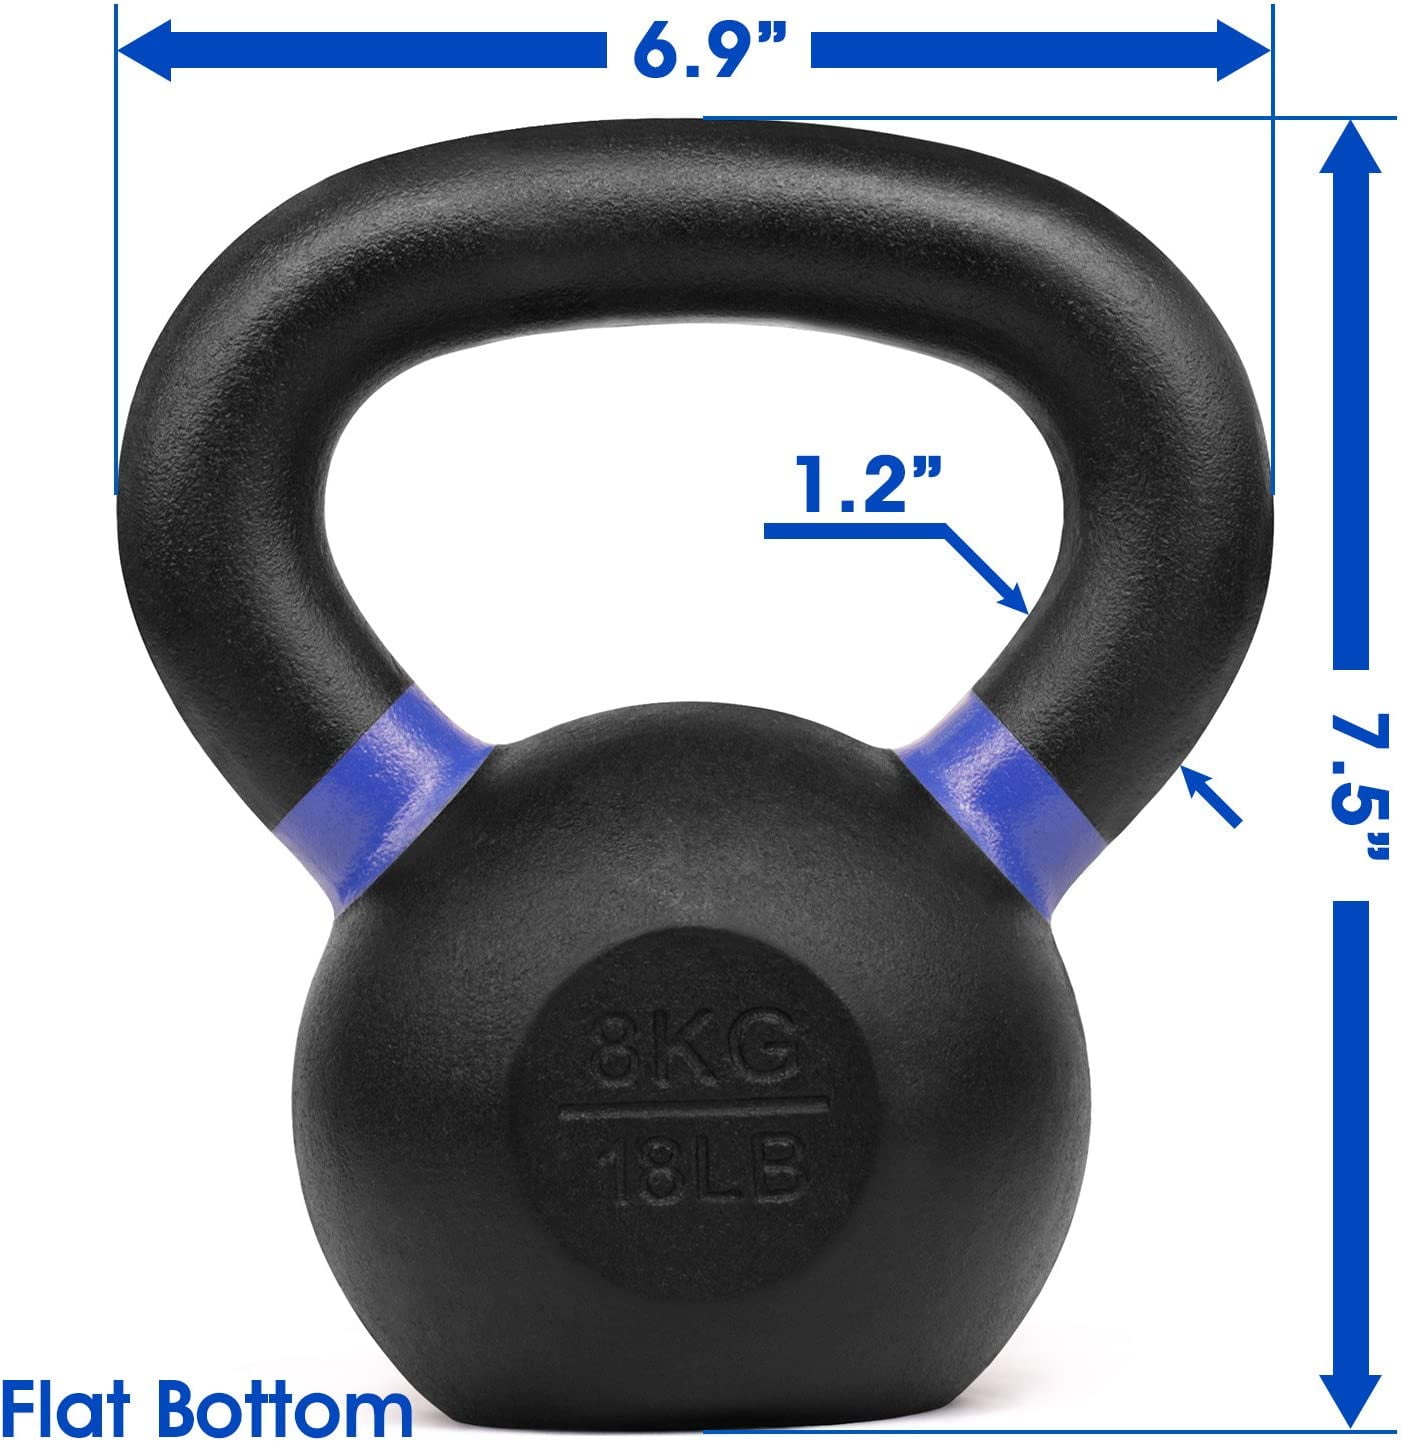 Yes4All 6kg / 13lb Powder Coated Kettlebell, Single 